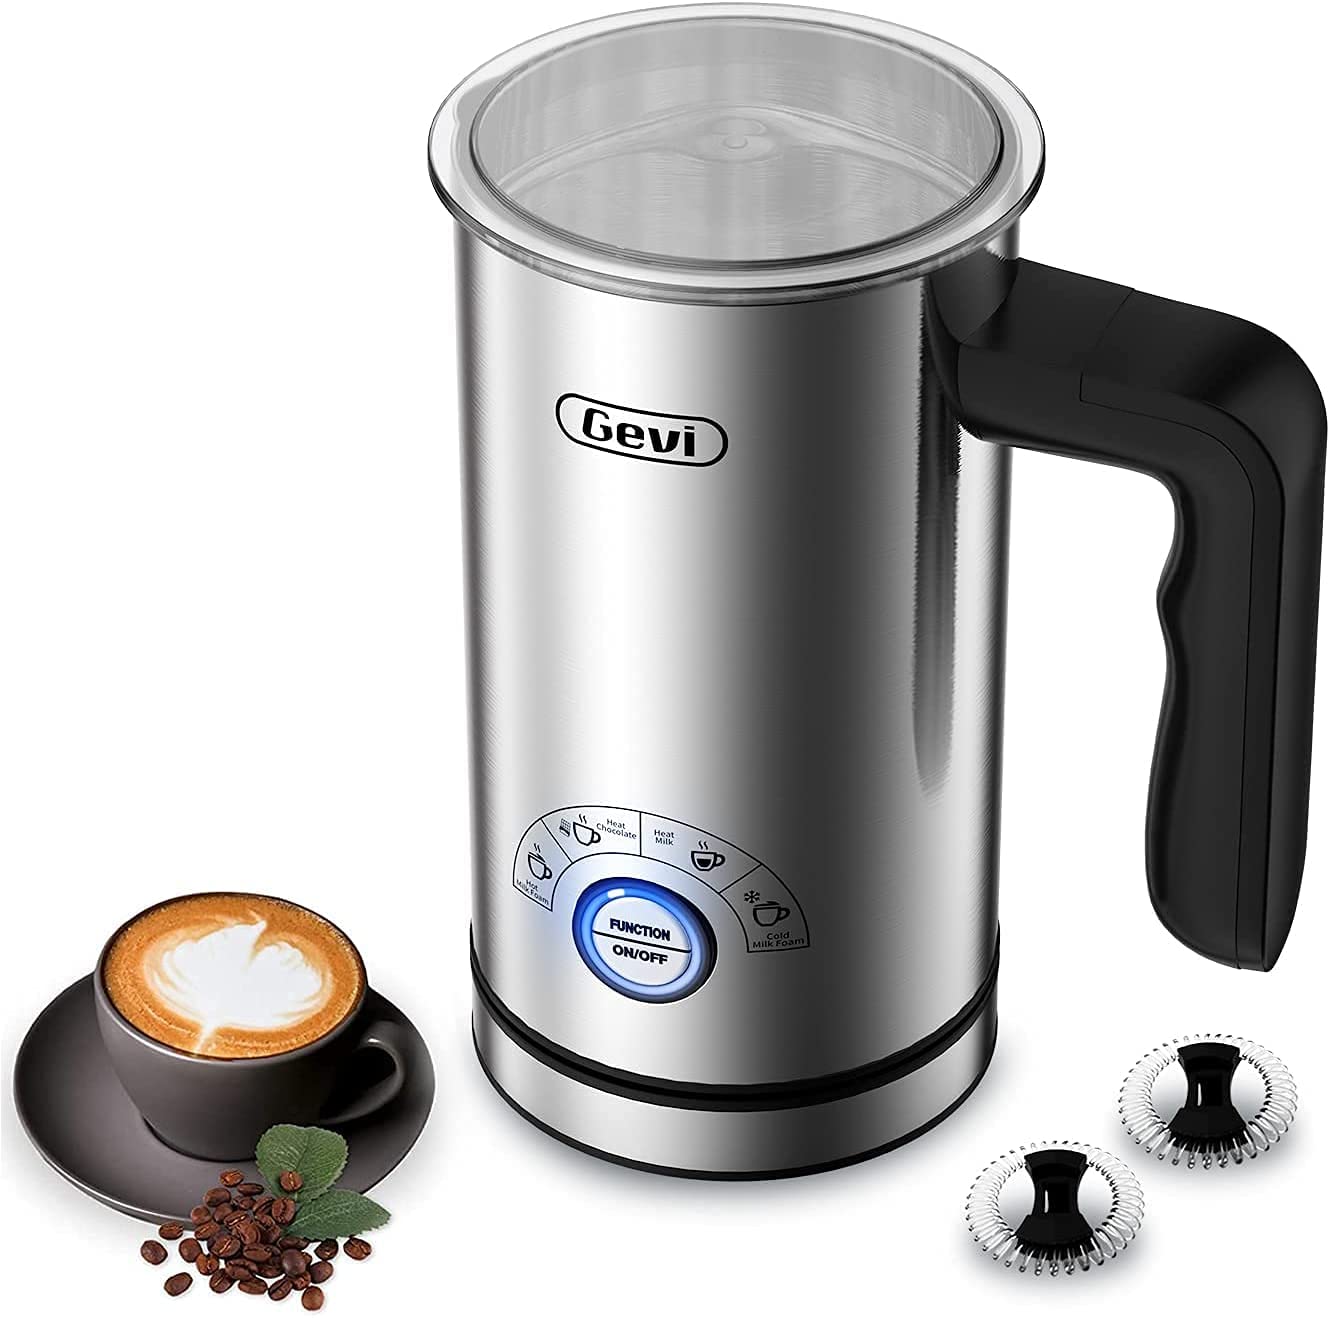 BEICHEN Milk Frother and Steamer, 4-in-1 Milk Foamer Frother for